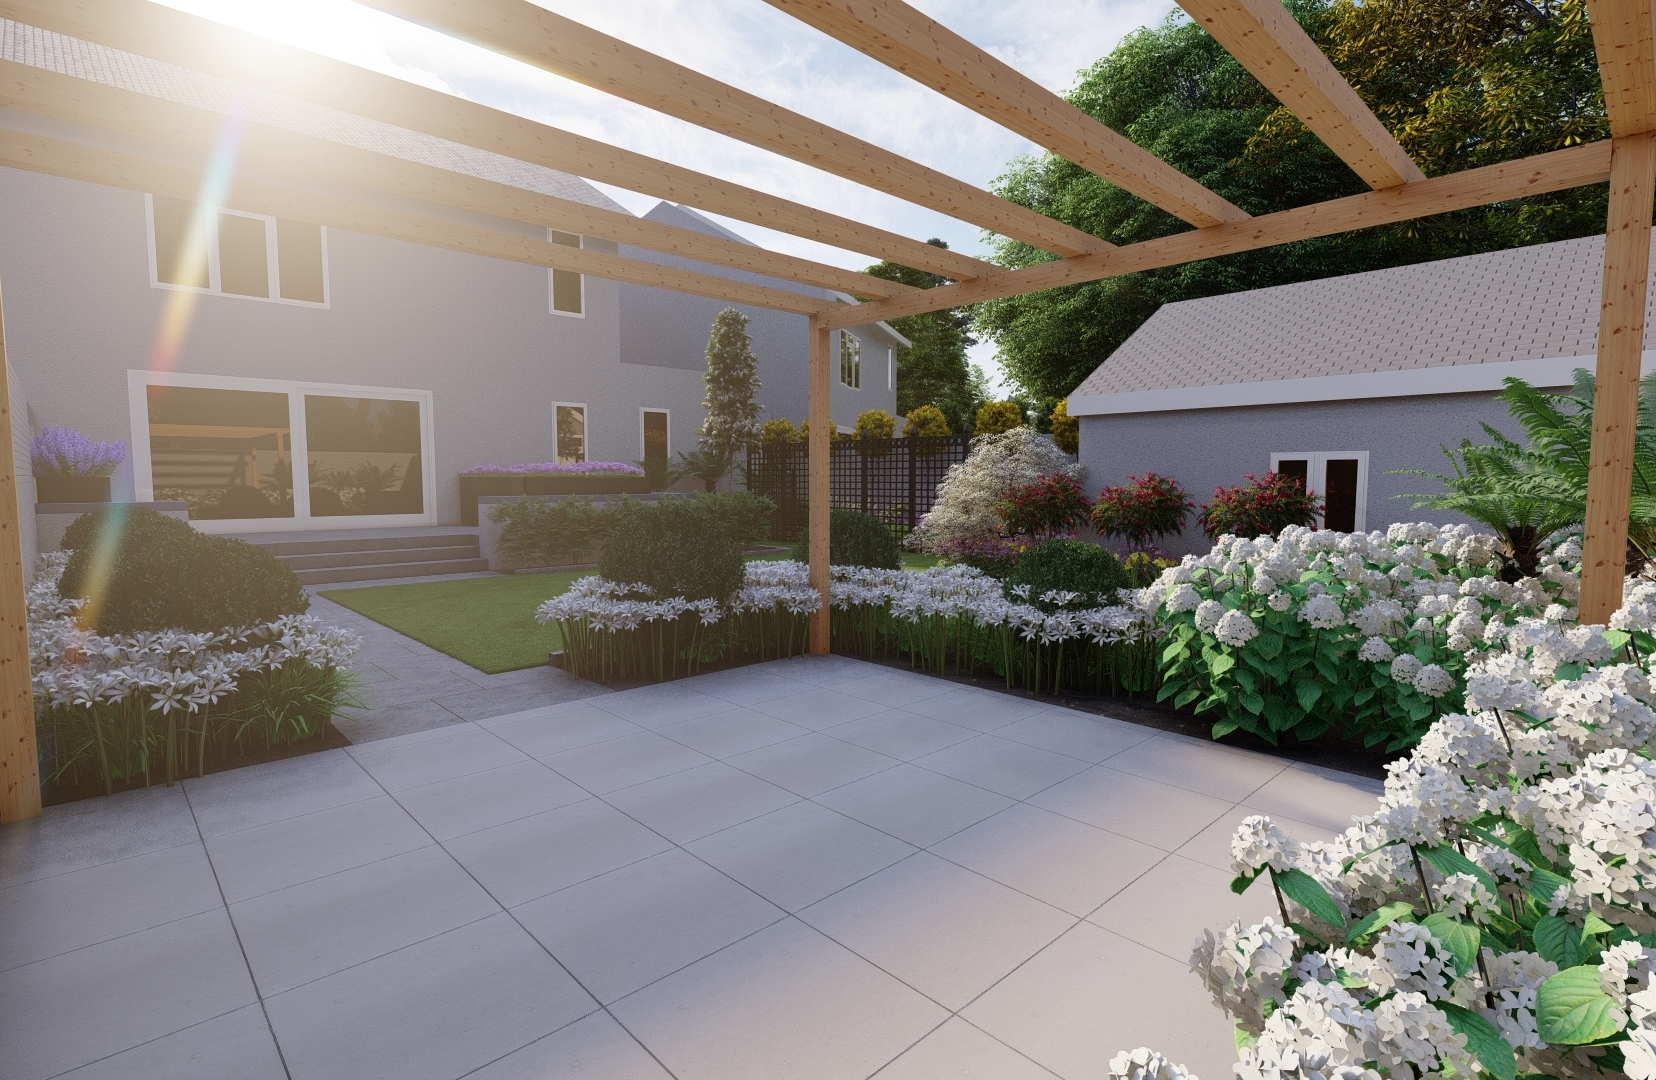 Family Garden Design in Terenure, Dublin 6W with Bespoke Pergola, Fencing and custom made steel garden Trellis screens separating ornamental and vegetable growing spaces | Owen Chubb Garden Landscapers, Tel 087-2306128